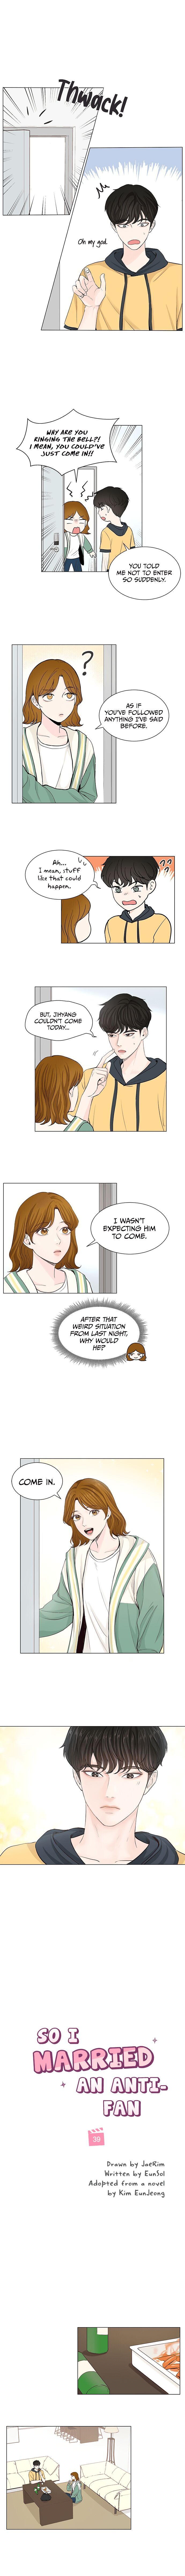 So I Married An Anti-Fan Chapter 039 page 3